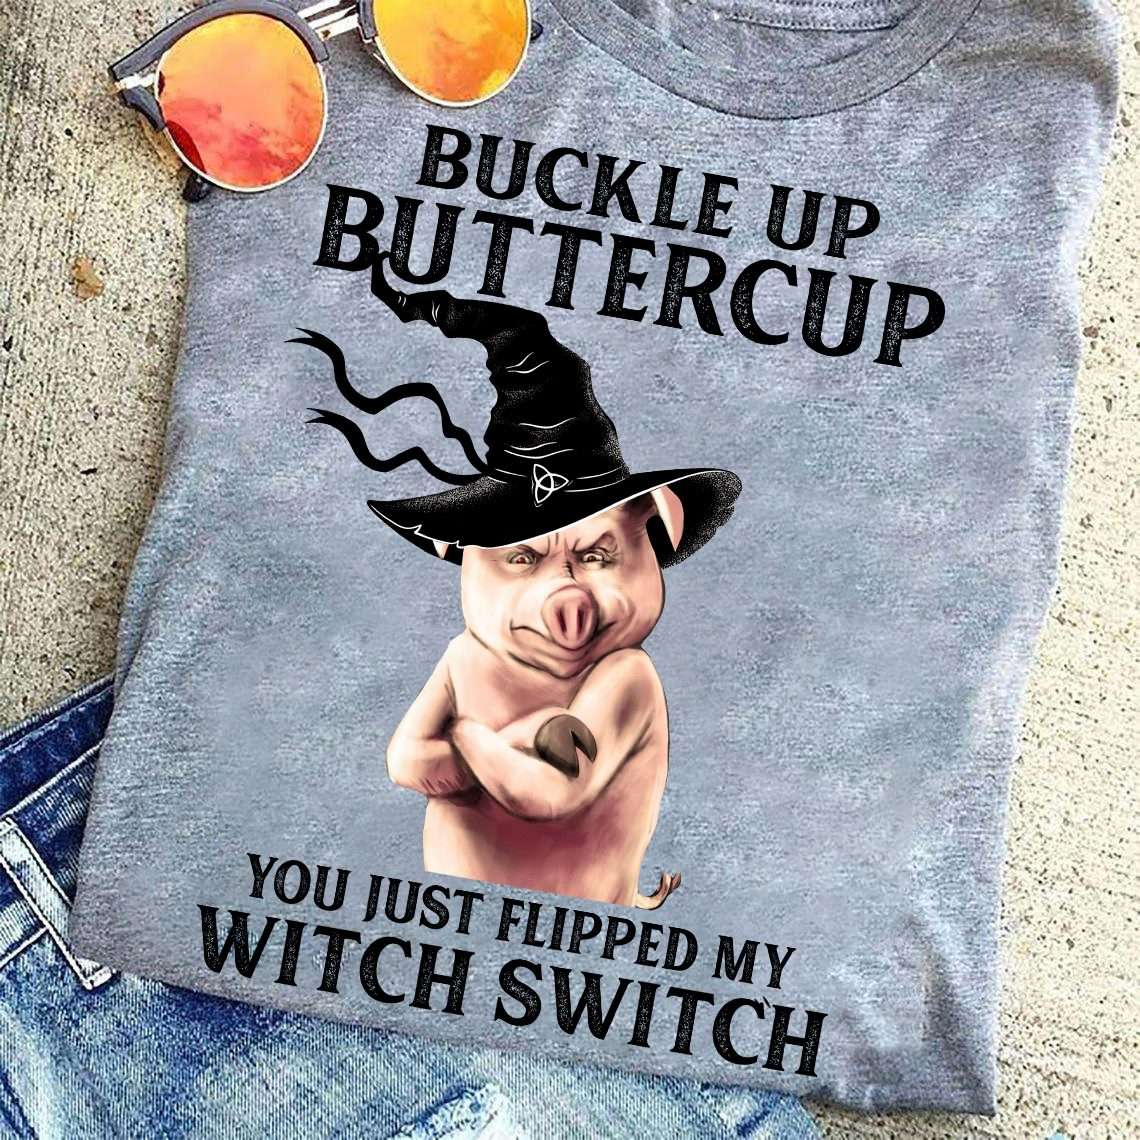 Buckle up buttercup you just flipped my witch switch - Pig witch, Halloween witch costume